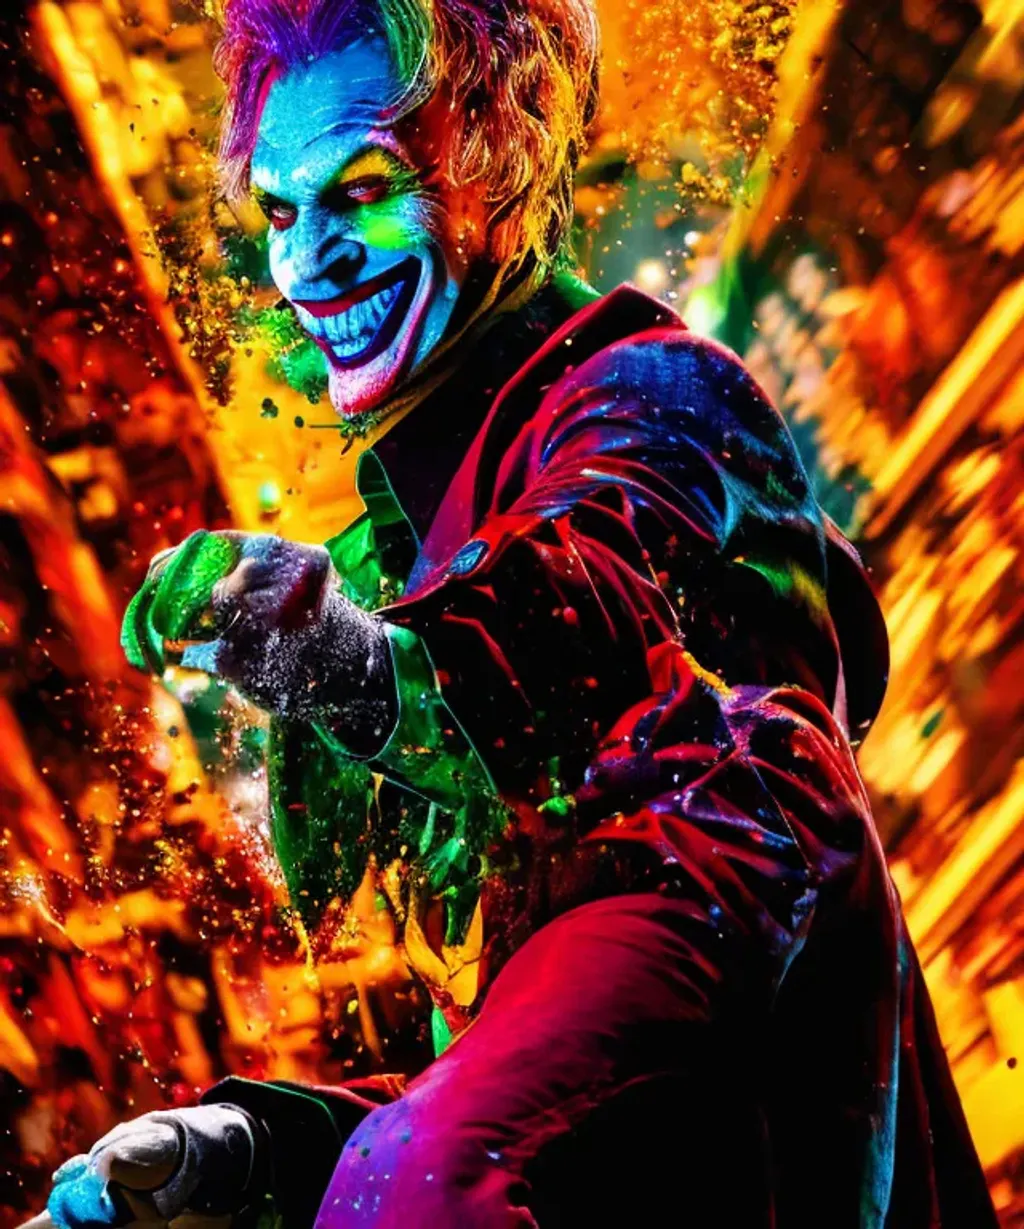 Prompt: vivid dripping colors Joker, Jered Leto vivid color street level action scene low angle masterpiece, cinematic, dramatic, Artstation, by Frank Frazetta, by H.R. Giger, by Mark Brooks, Octane render, Unreal Engine, by Wētā FX, by WLOP, Filmic, Photography, Photoshoot, Ultra-Wide Angle, Depth of Field, DOF, F/2.8, 5-Dimensional, Everdimensional, Alldimensional, 8K, 32k, Megapixel, CMYK, Adobe RGB, HSV, ProPhoto RGB, Rim Lights, Marquee, Stroboscope, OLED, AMOLED, Quantum Dot Display, Global Illumination, Ray Tracing Global Illumination, Ambient Occlusion, Translucidluminescence, Shadows, Chromatic, Prismatic, Lumen Reflections, Parallax, Quantization, Edge Detection, Textured, Convolution Matrix, Harris Shutter, FXAA, Post Processing, SFX, insanely detailed and intricate, hypermaximalist, elegant, ornate, hyper realistic, super detailed, poster, sharp focus, hyperrealism, insanely detailed, lush detail, filigree, intricate, crystalline, perfectionism, max detail, 4k uhd, spirals, tendrils, ornate, HQ, hard edge, breathtaking, mdjrny-v4 style, highly detailed, tarot card, symmetry, character design, professional